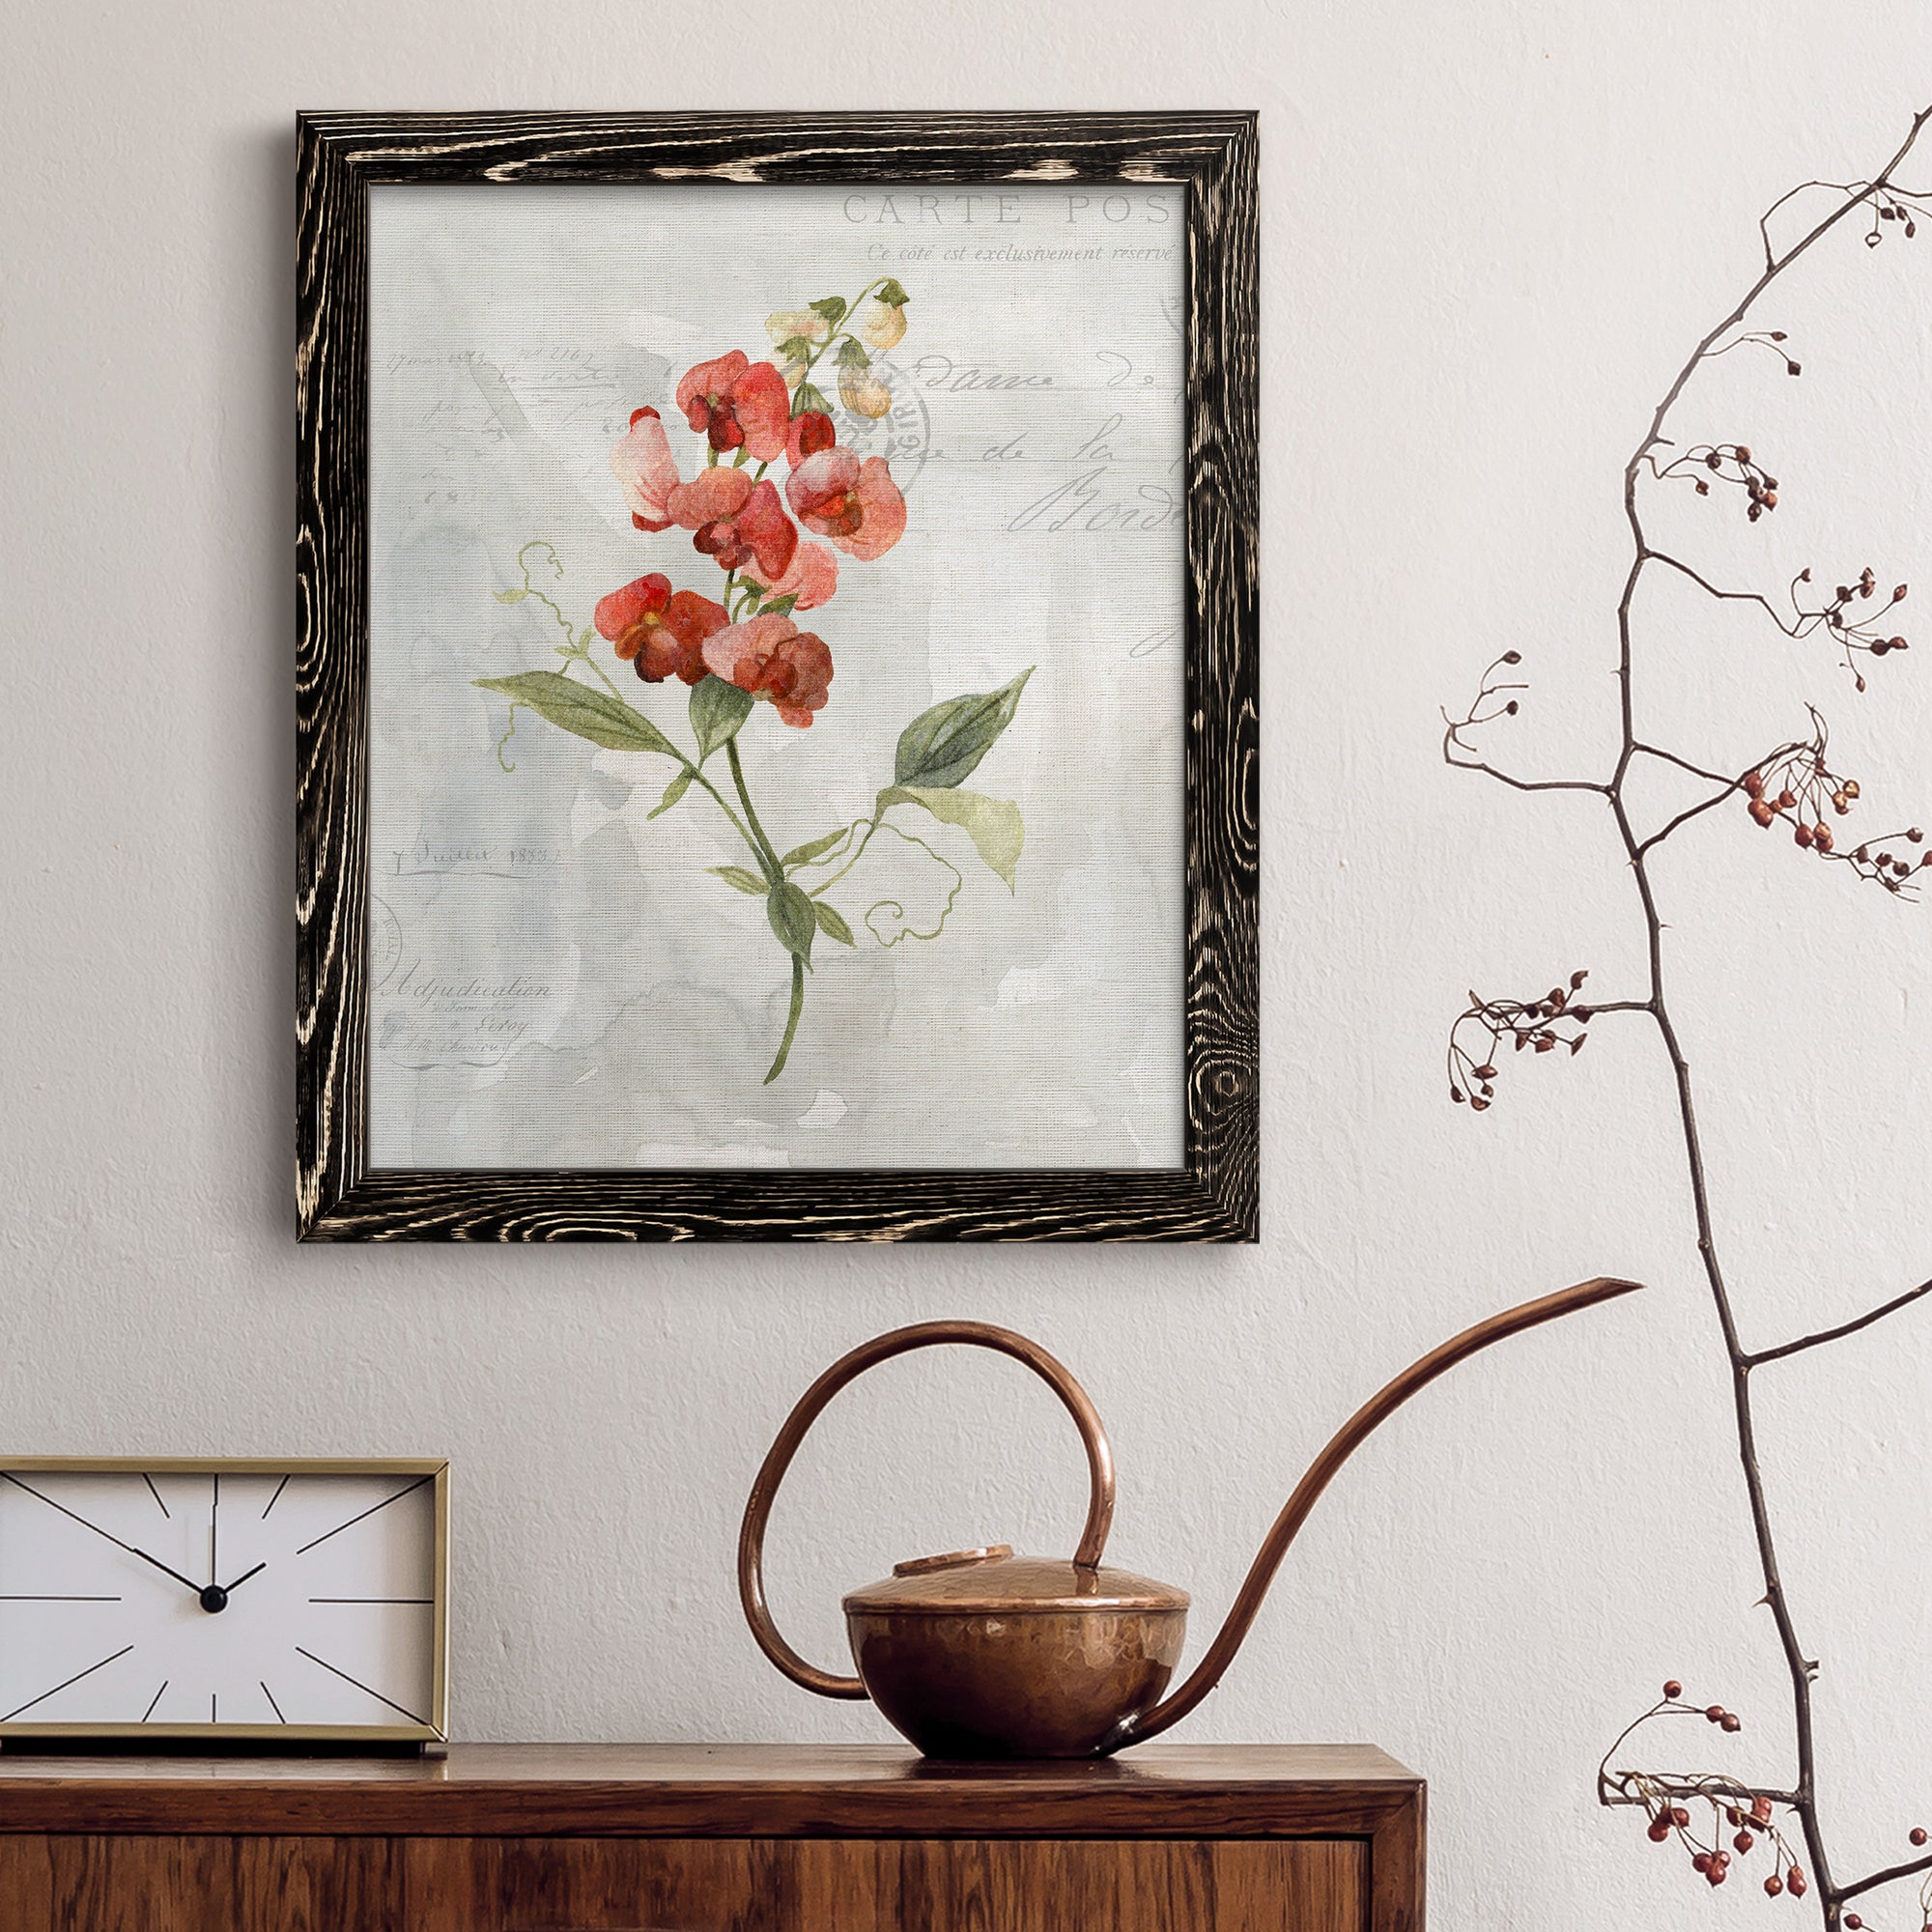 Linen Sweet Pea - Premium Canvas Framed in Barnwood - Ready to Hang